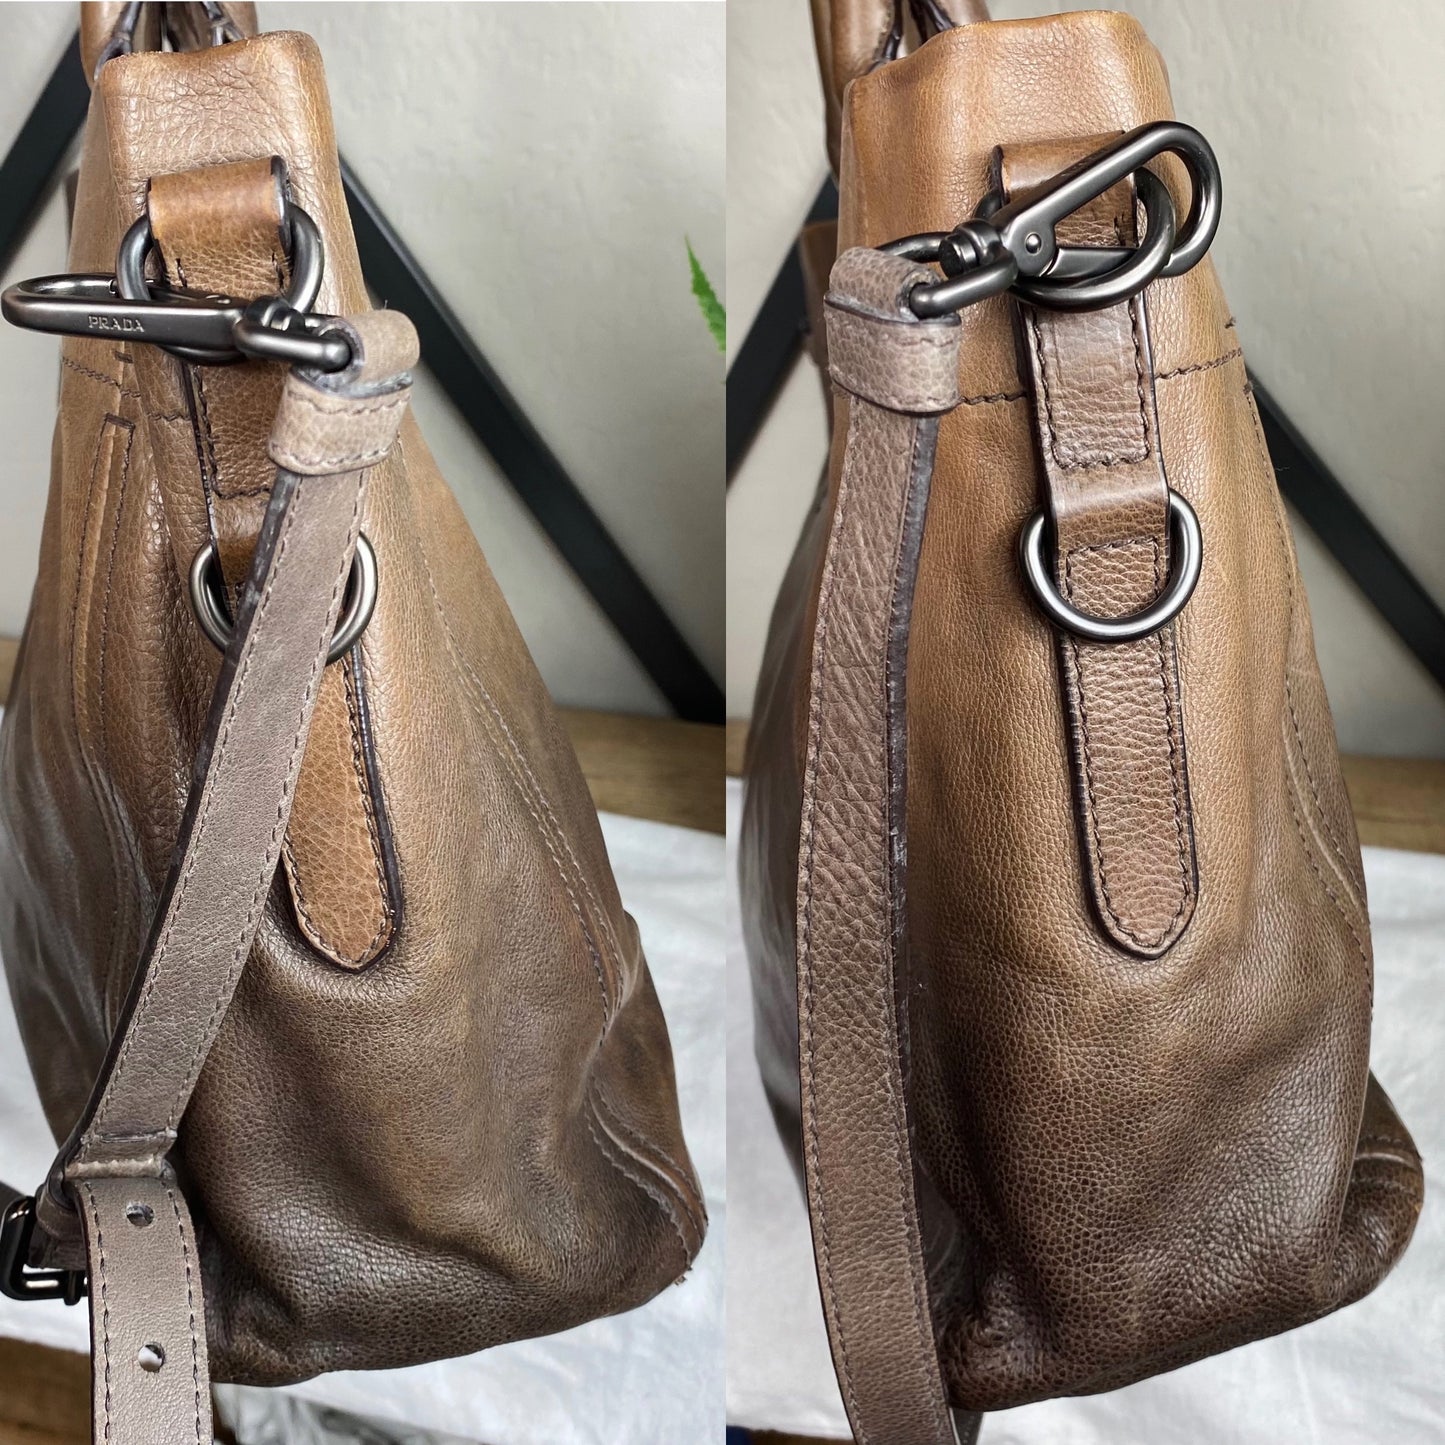 Prada Ombré Glace Leather Two Way Tote